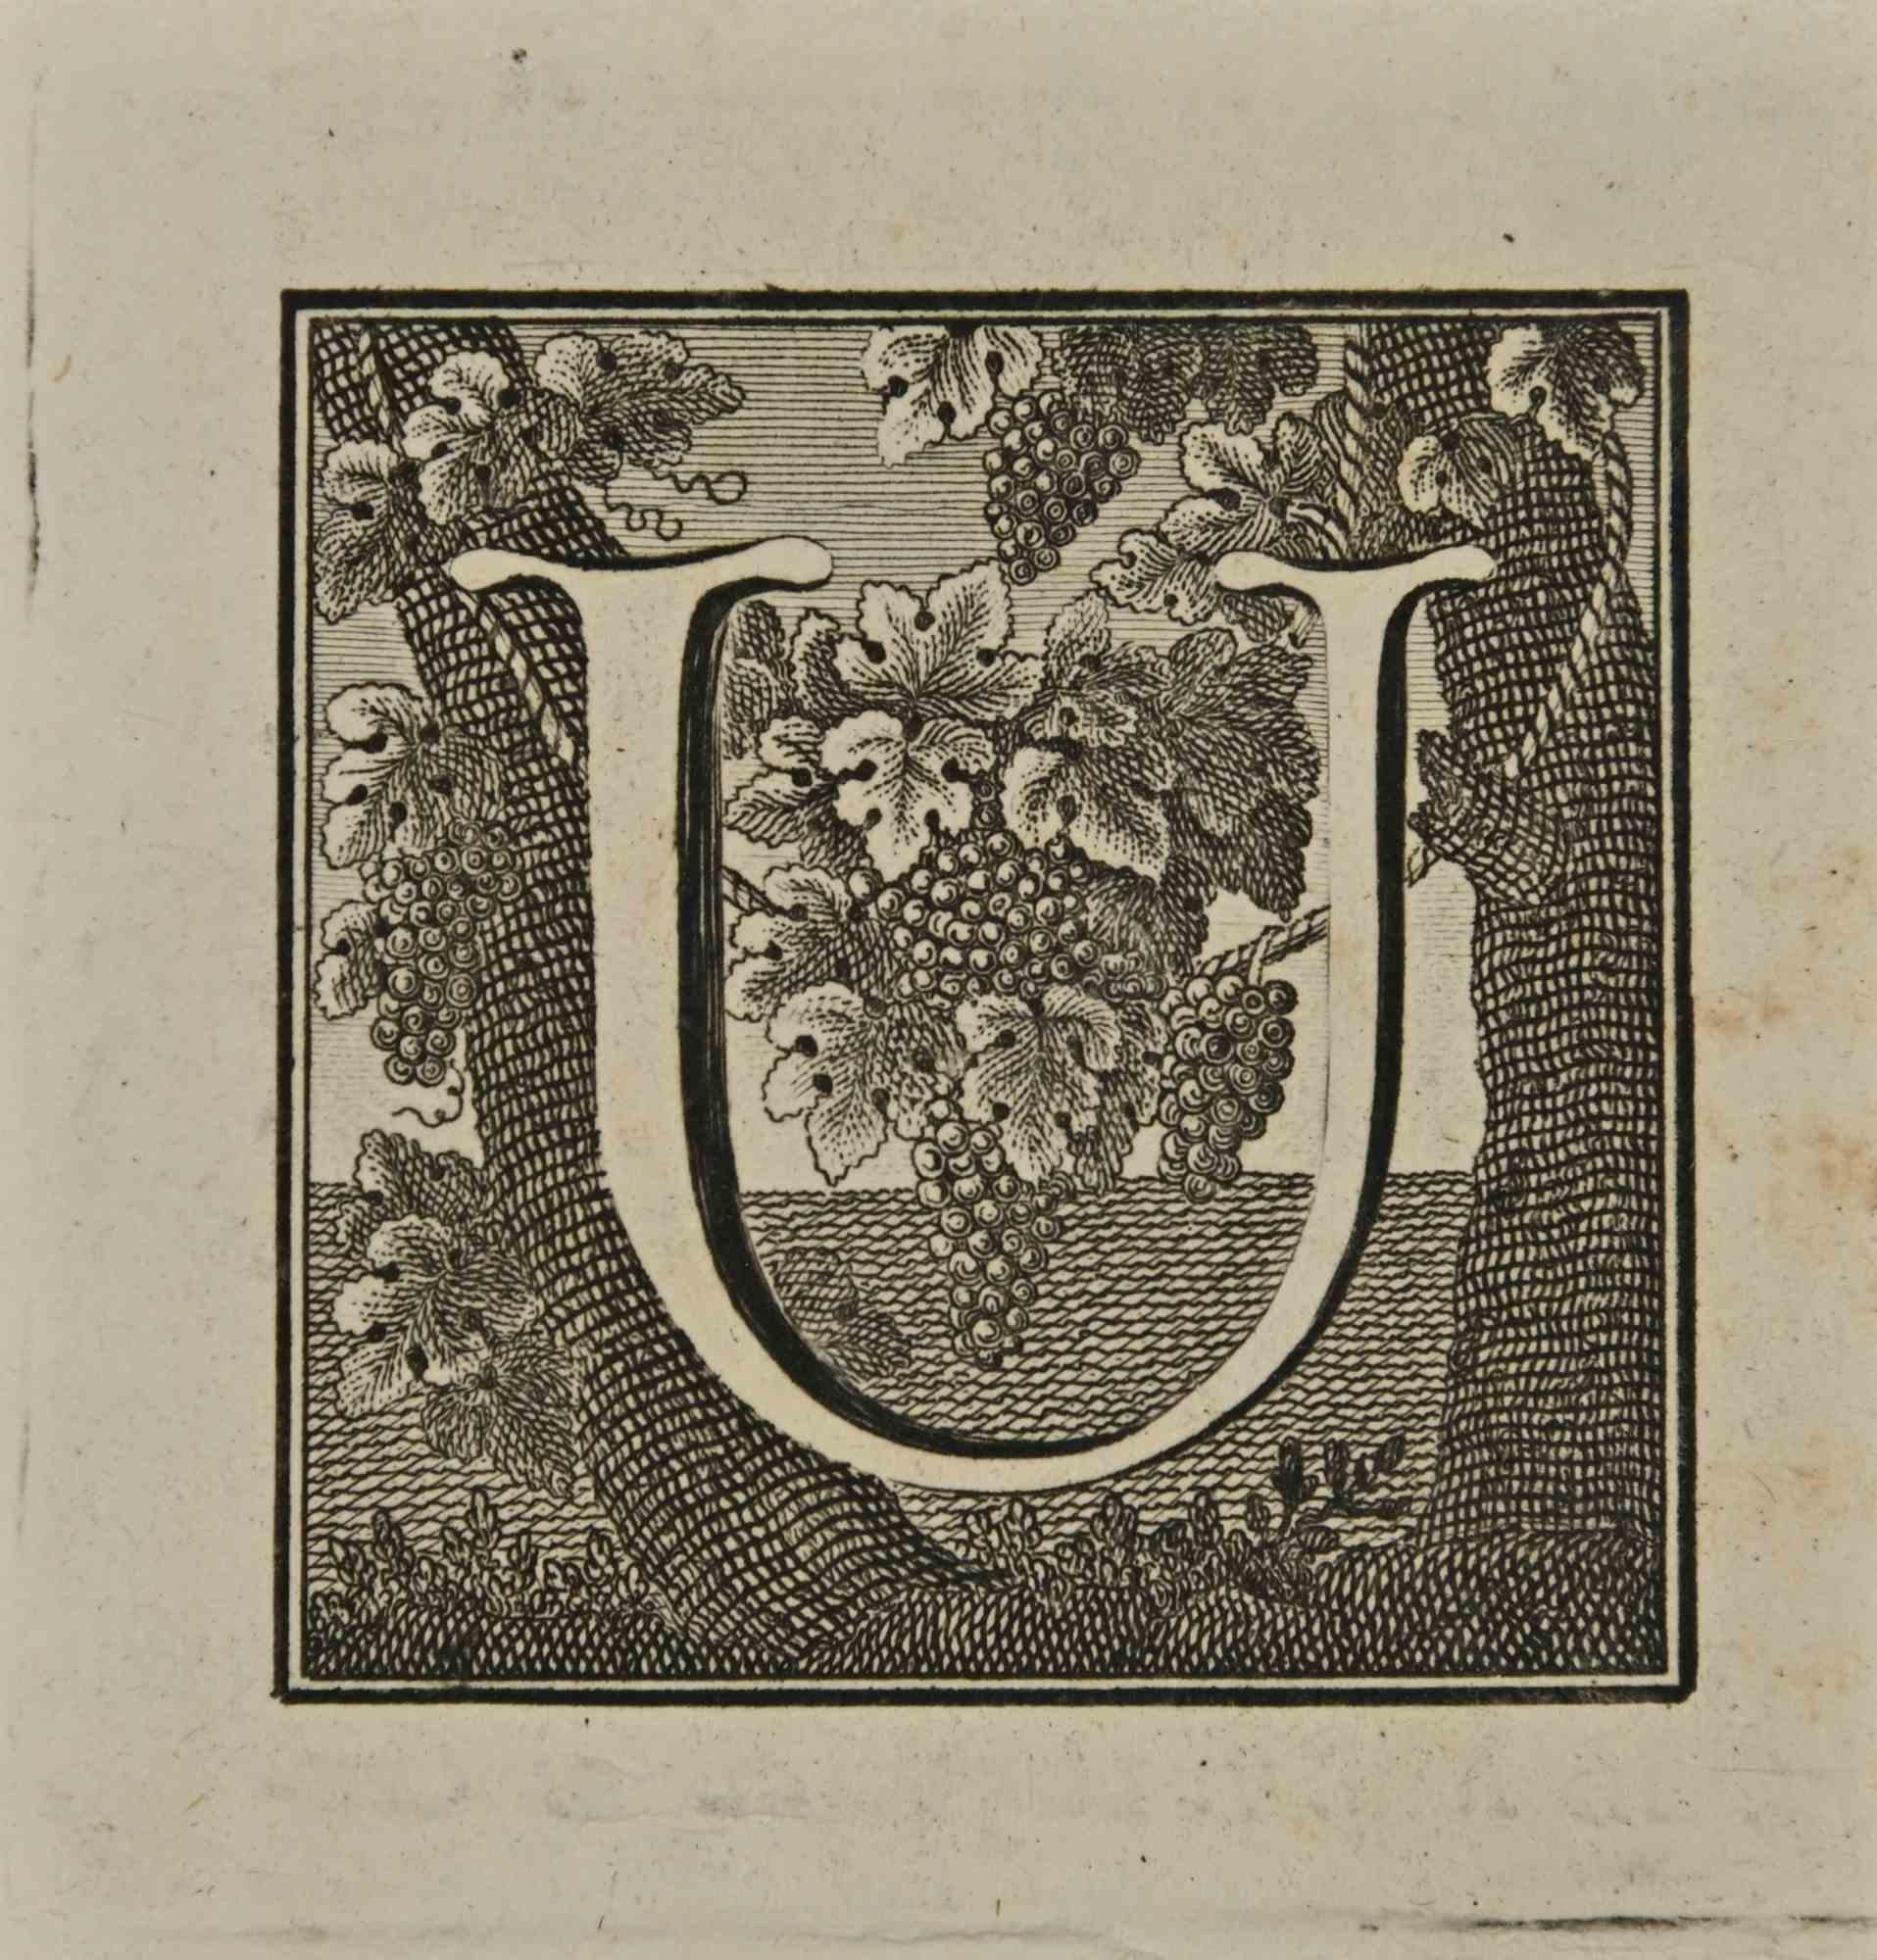 Letter of the Alphabet U,  from the series "Antiquities of Herculaneum", is an etching on paper realized by Luigi Vanvitelli in the 18th century.

Good conditions.

The etching belongs to the print suite “Antiquities of Herculaneum Exposed”